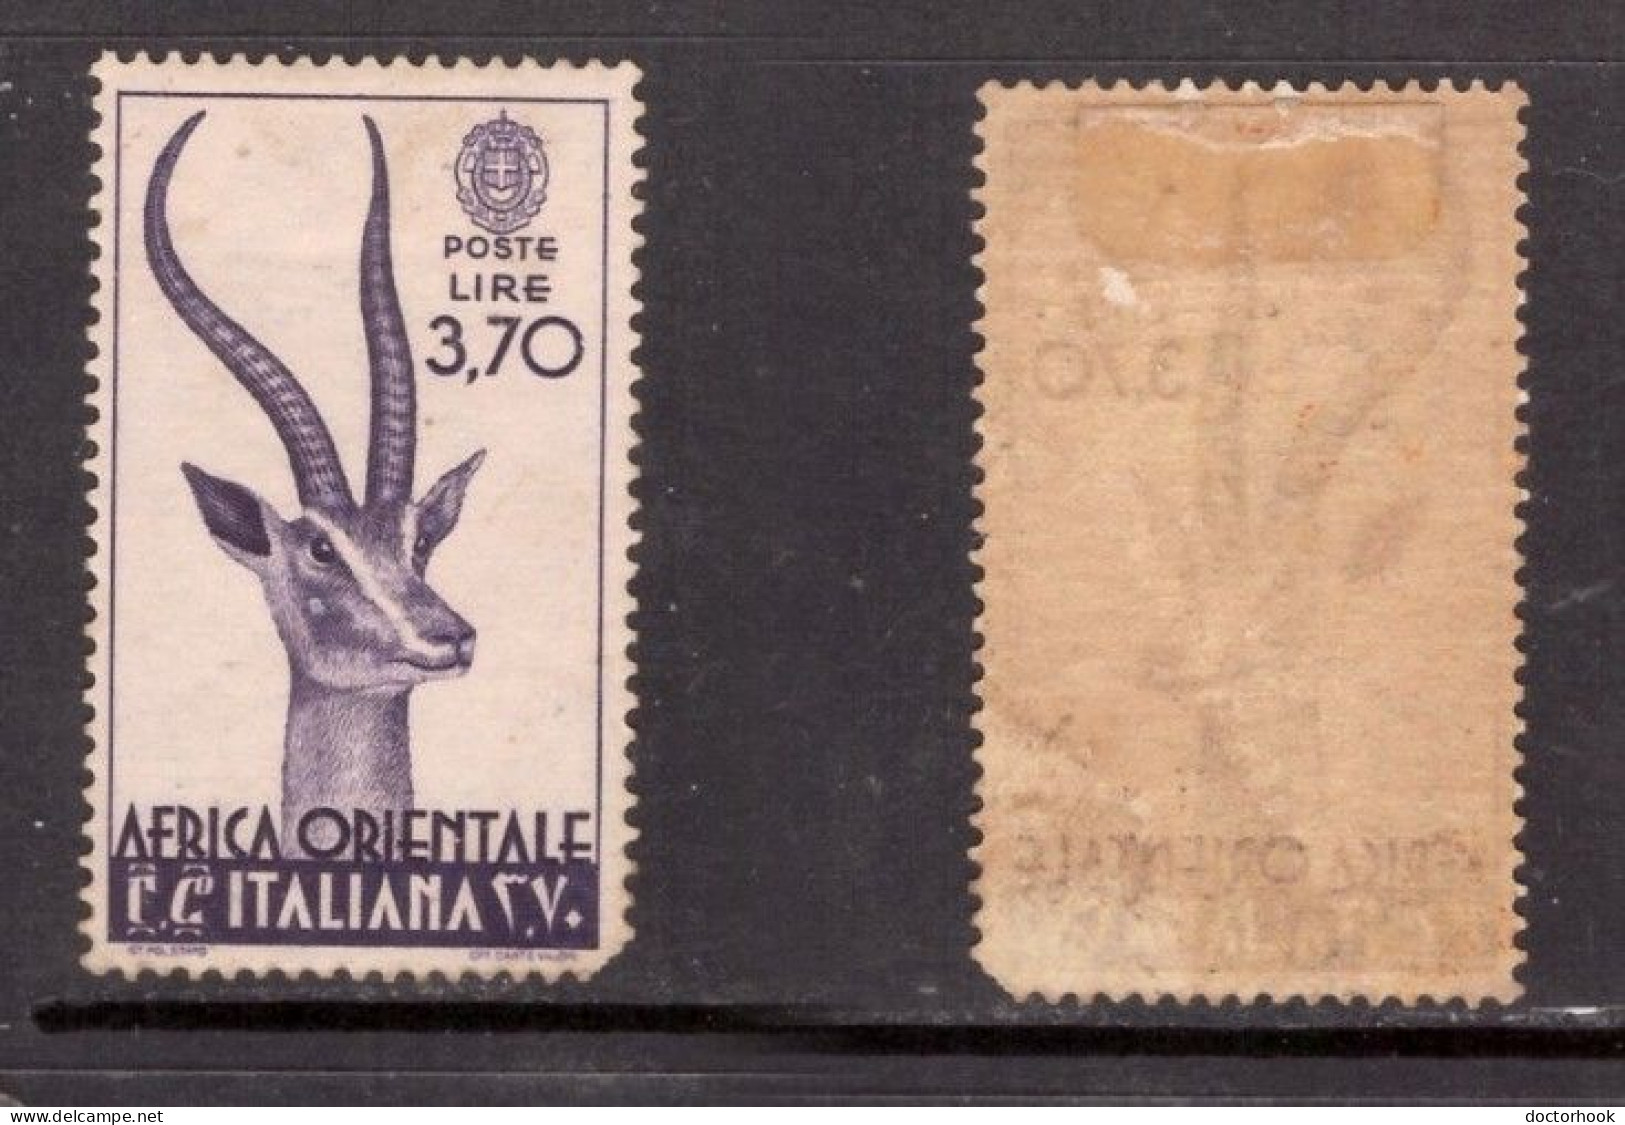 ITALIAN EAST AFRICA   Scott # 17* MINT HINGED (CONDITION AS PER SCAN) (Stamp Scan # 957-1) - Eastern Africa